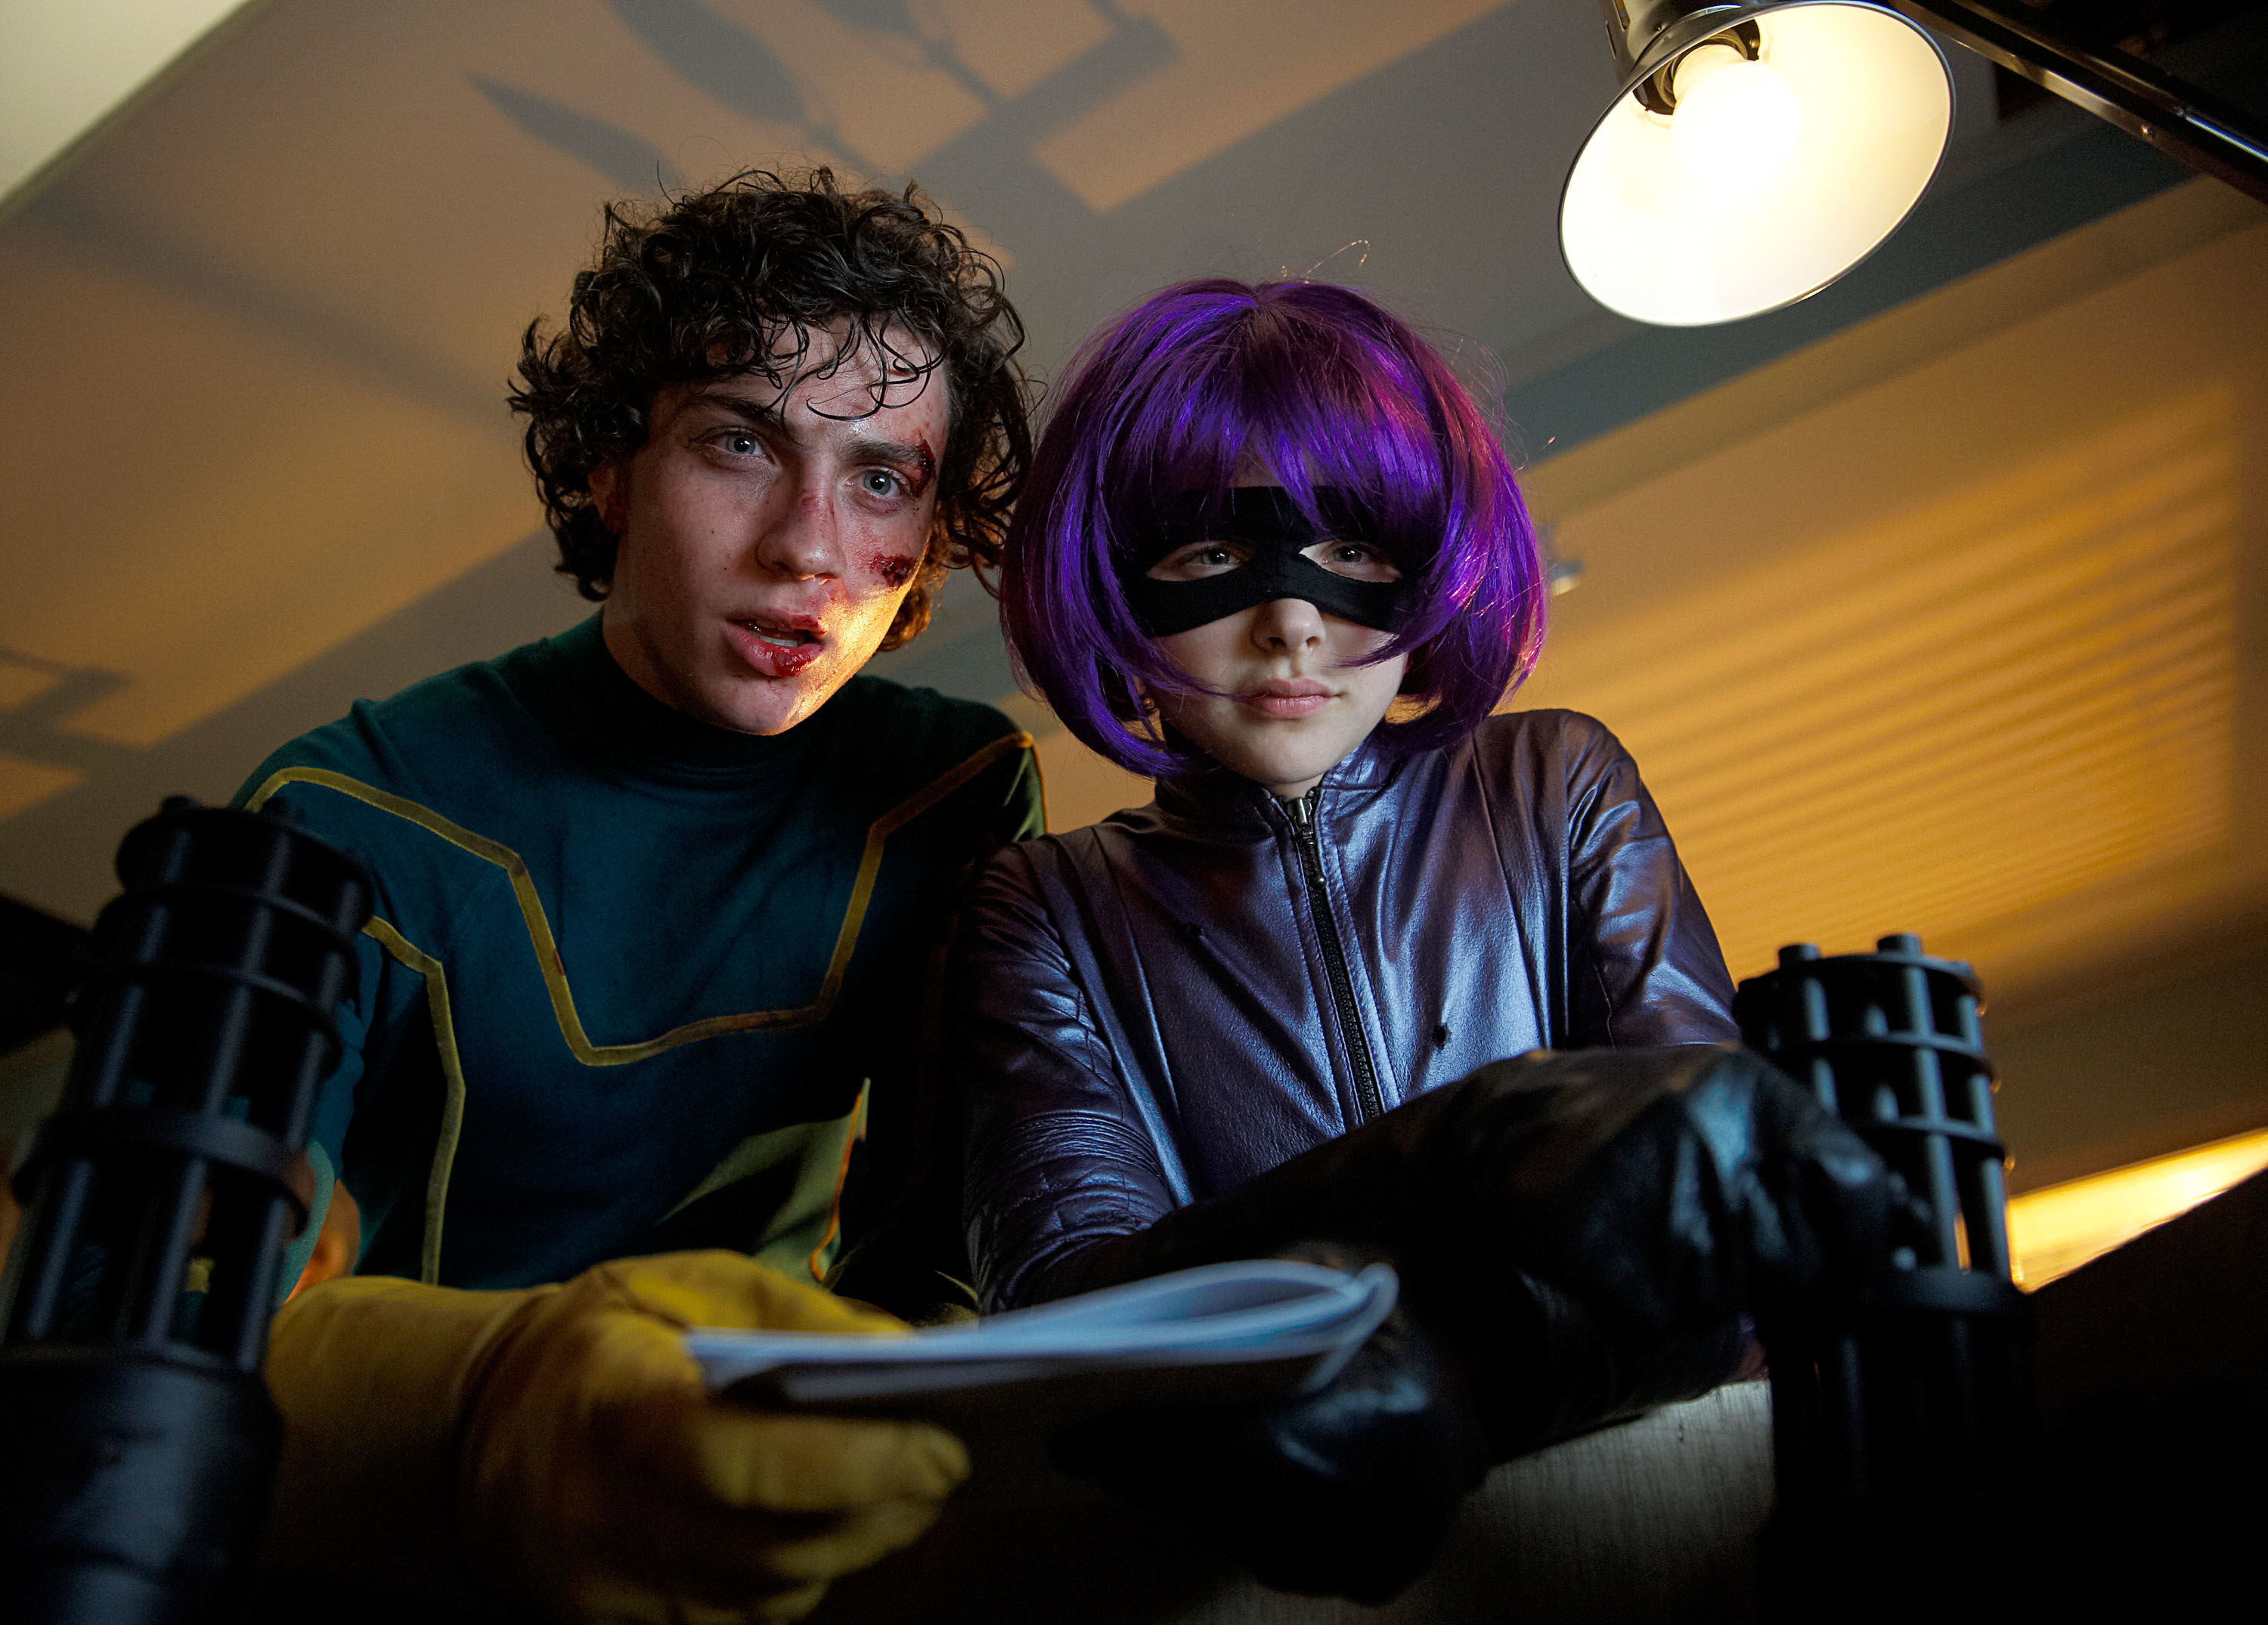 Aaron Johnson and Chloë Moretz wear superhero costumes and look down